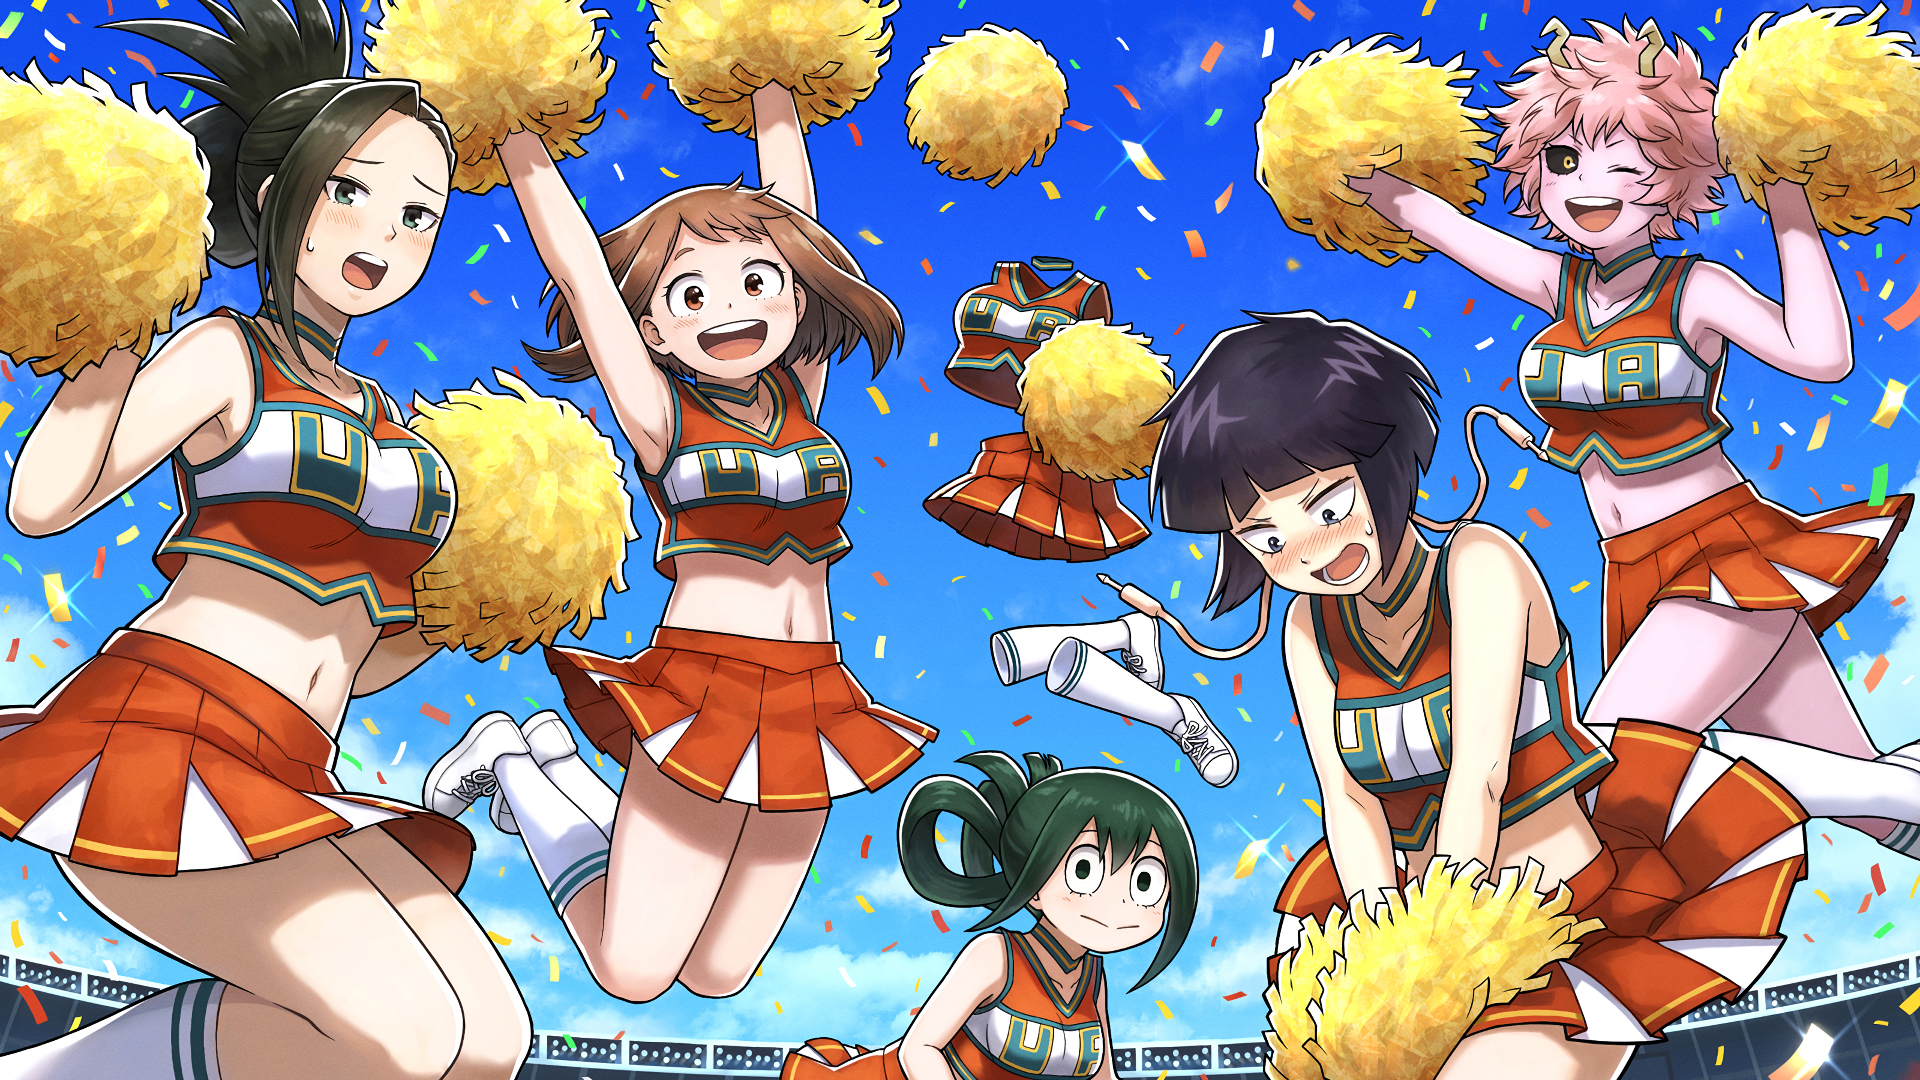 View, Download, Rate, and Comment on this My Hero Academia Cheerleader.